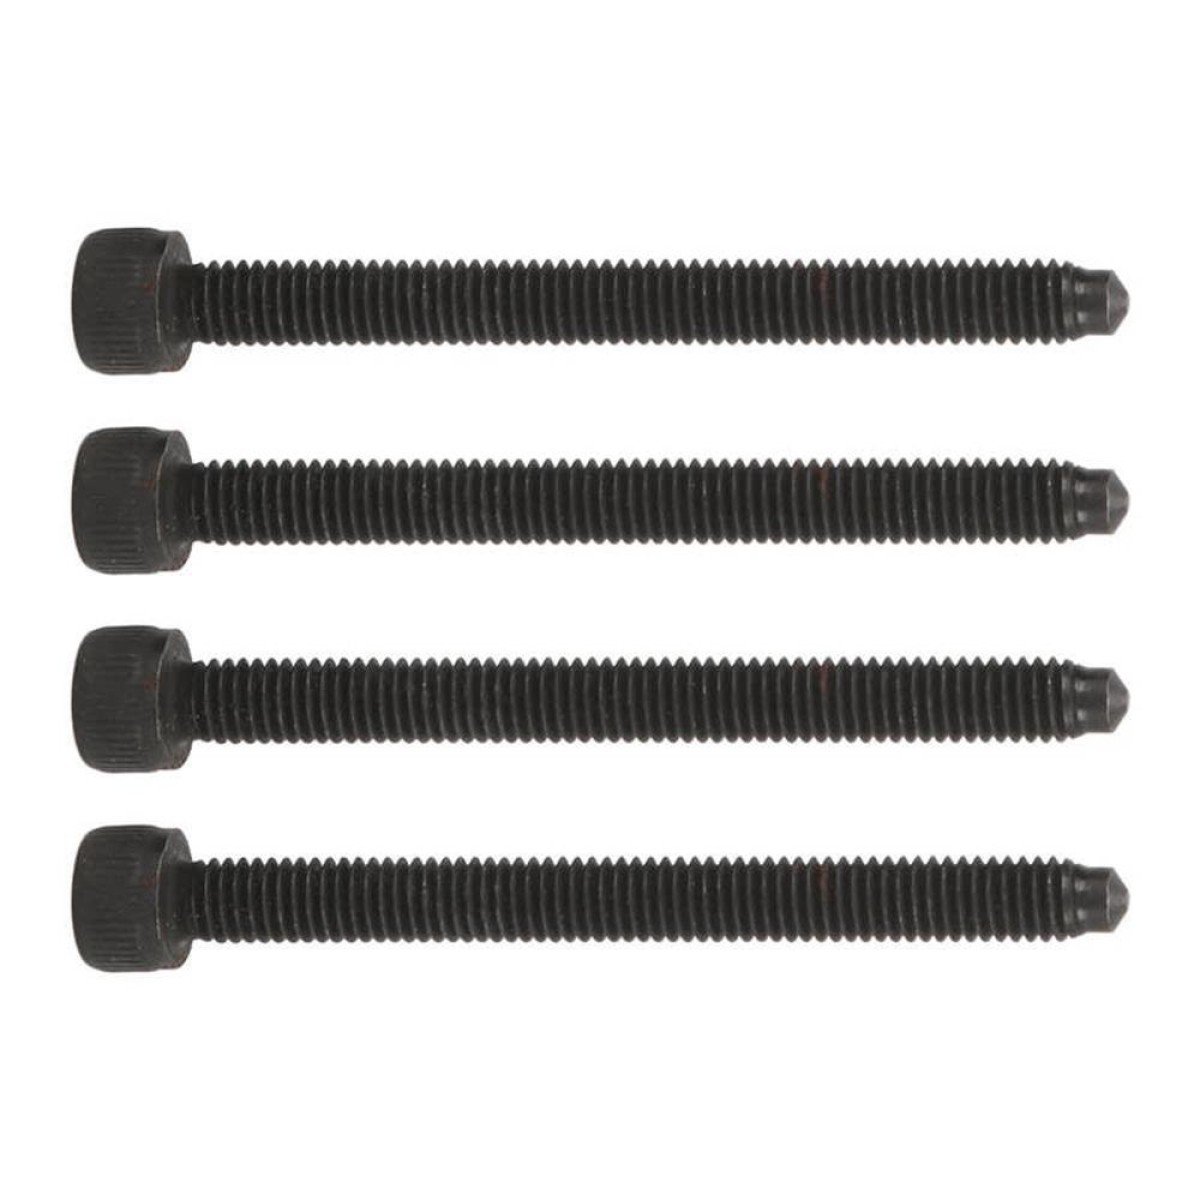 4 in 1 For Volkswagen/Audi/Ford Car Fuel Injector Screws Kit